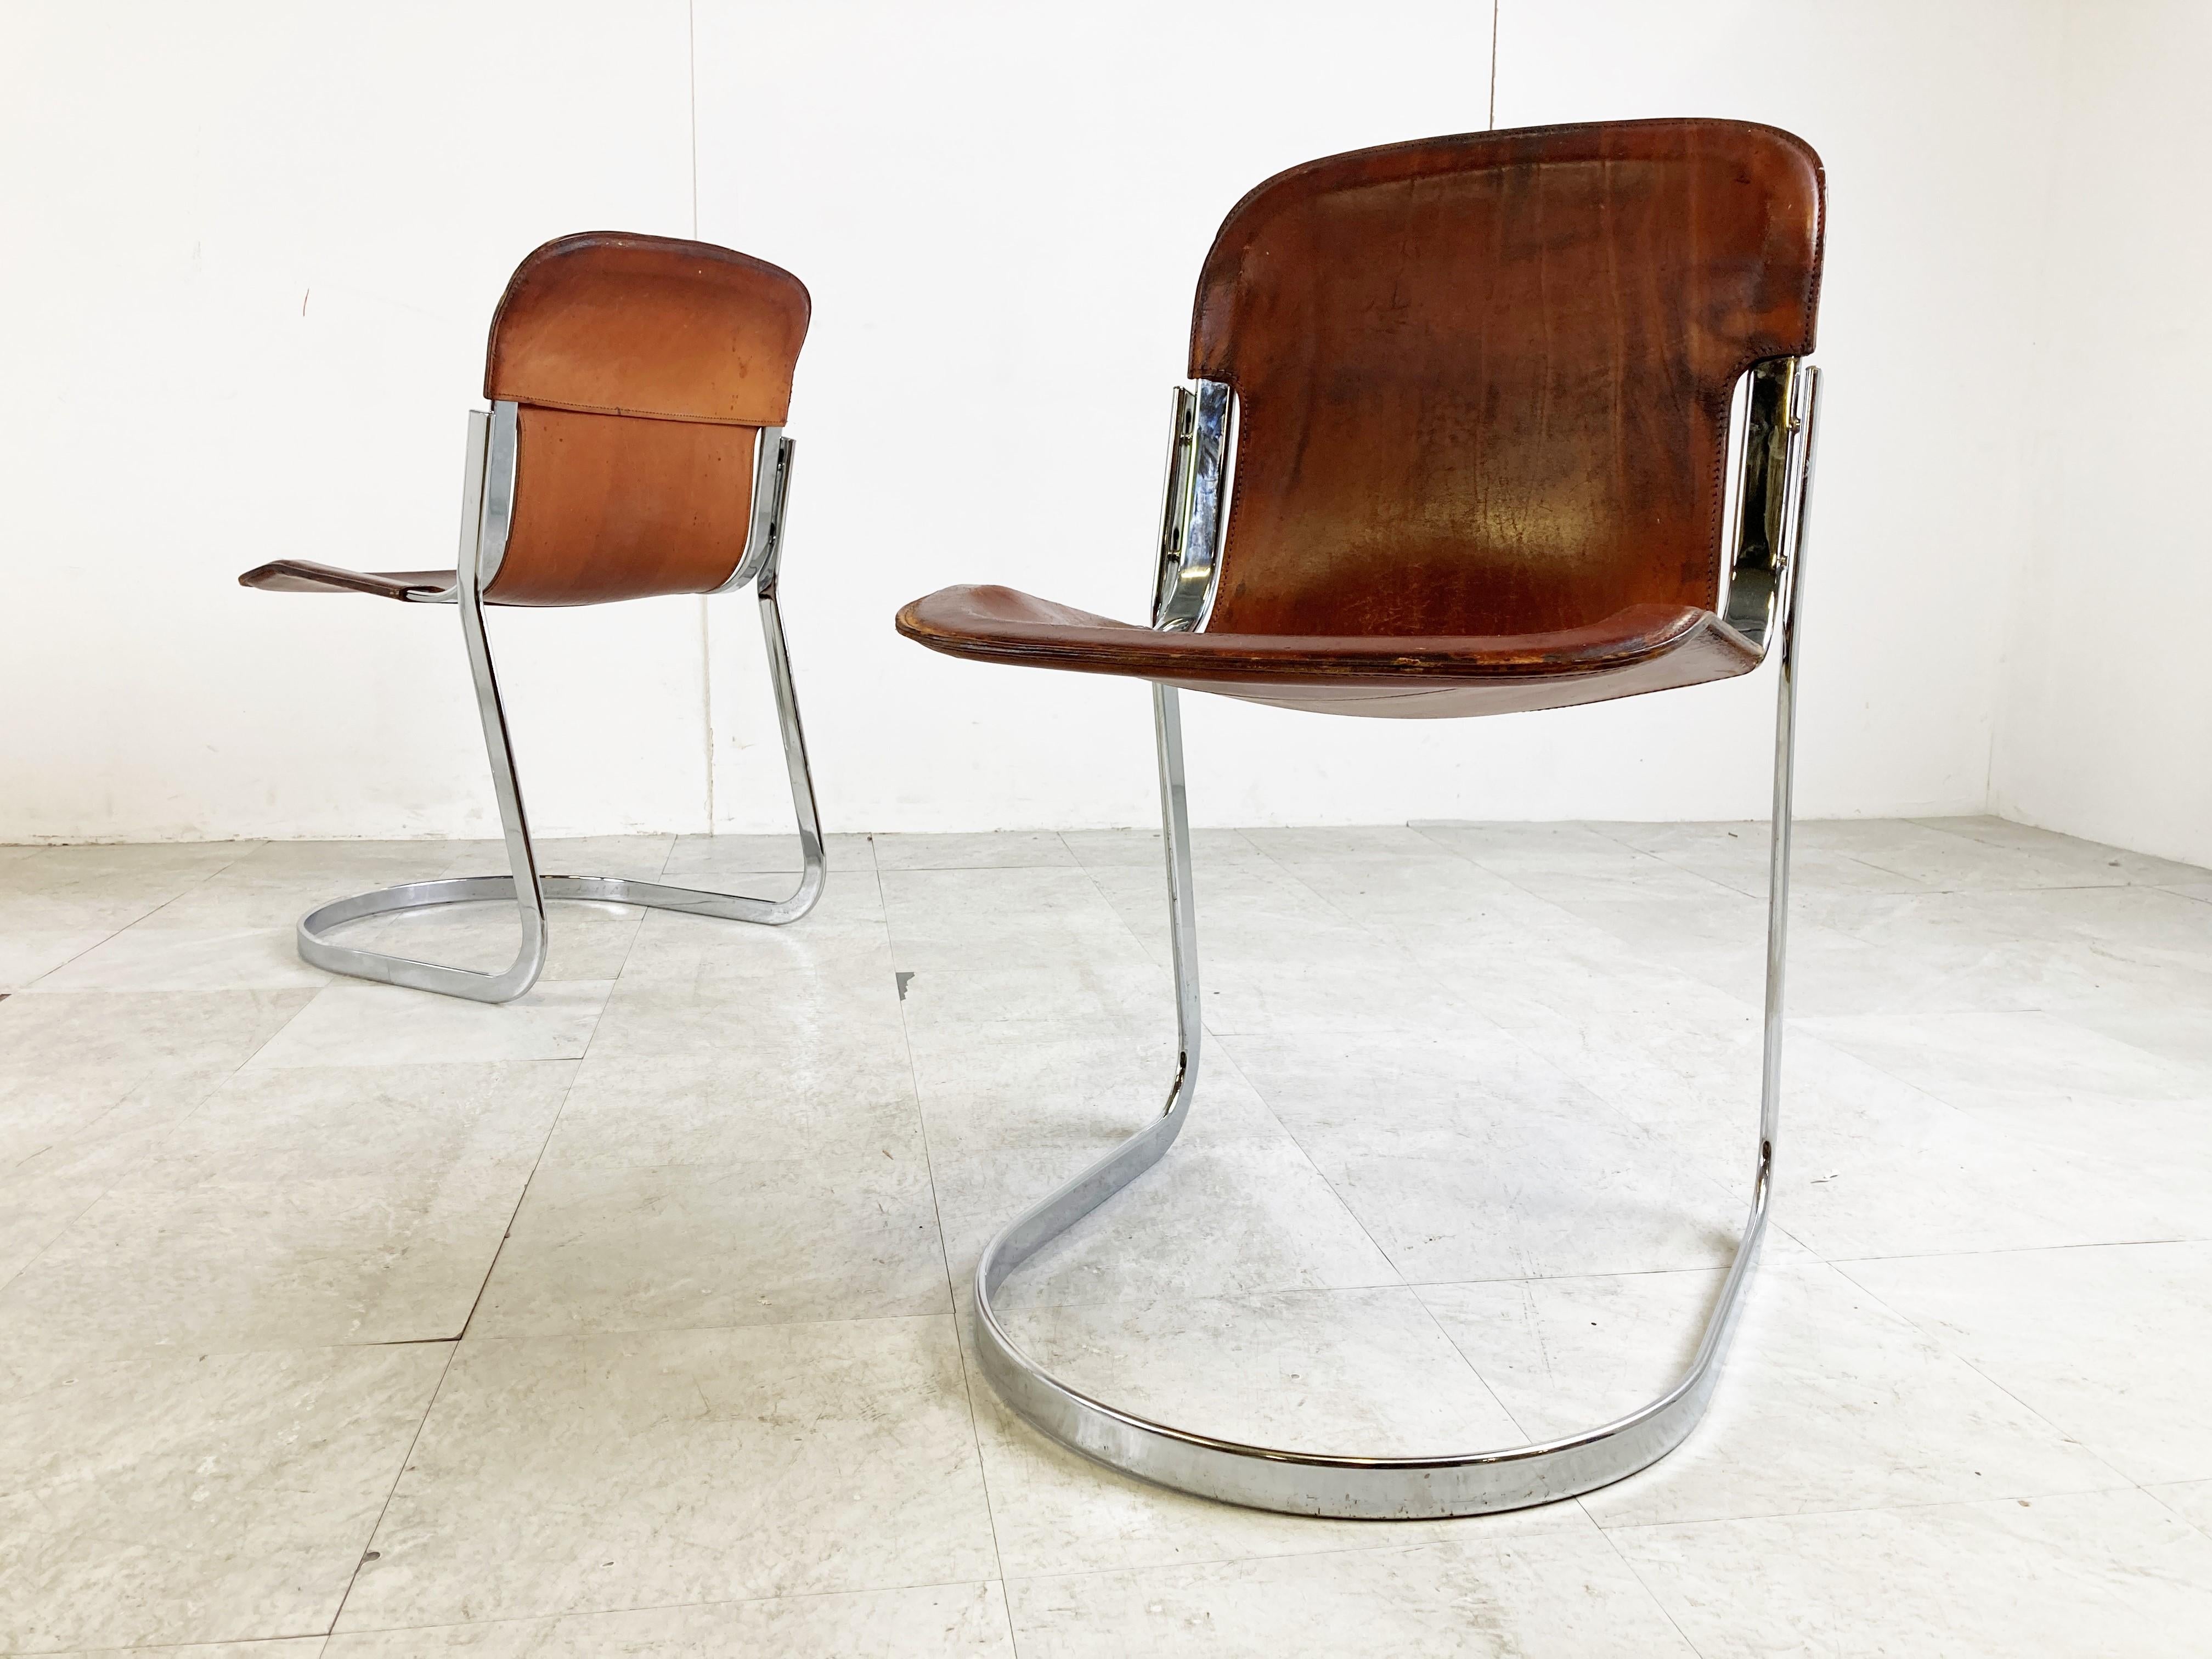 Set of 4 dining chairs designed by Willy Rizzo for Cidue (model C2).

The chairs have a beautifully shaped chrome frame and come with the original black leather seats.

The chairs are stackable.

Good vintage condition

The chairs still look